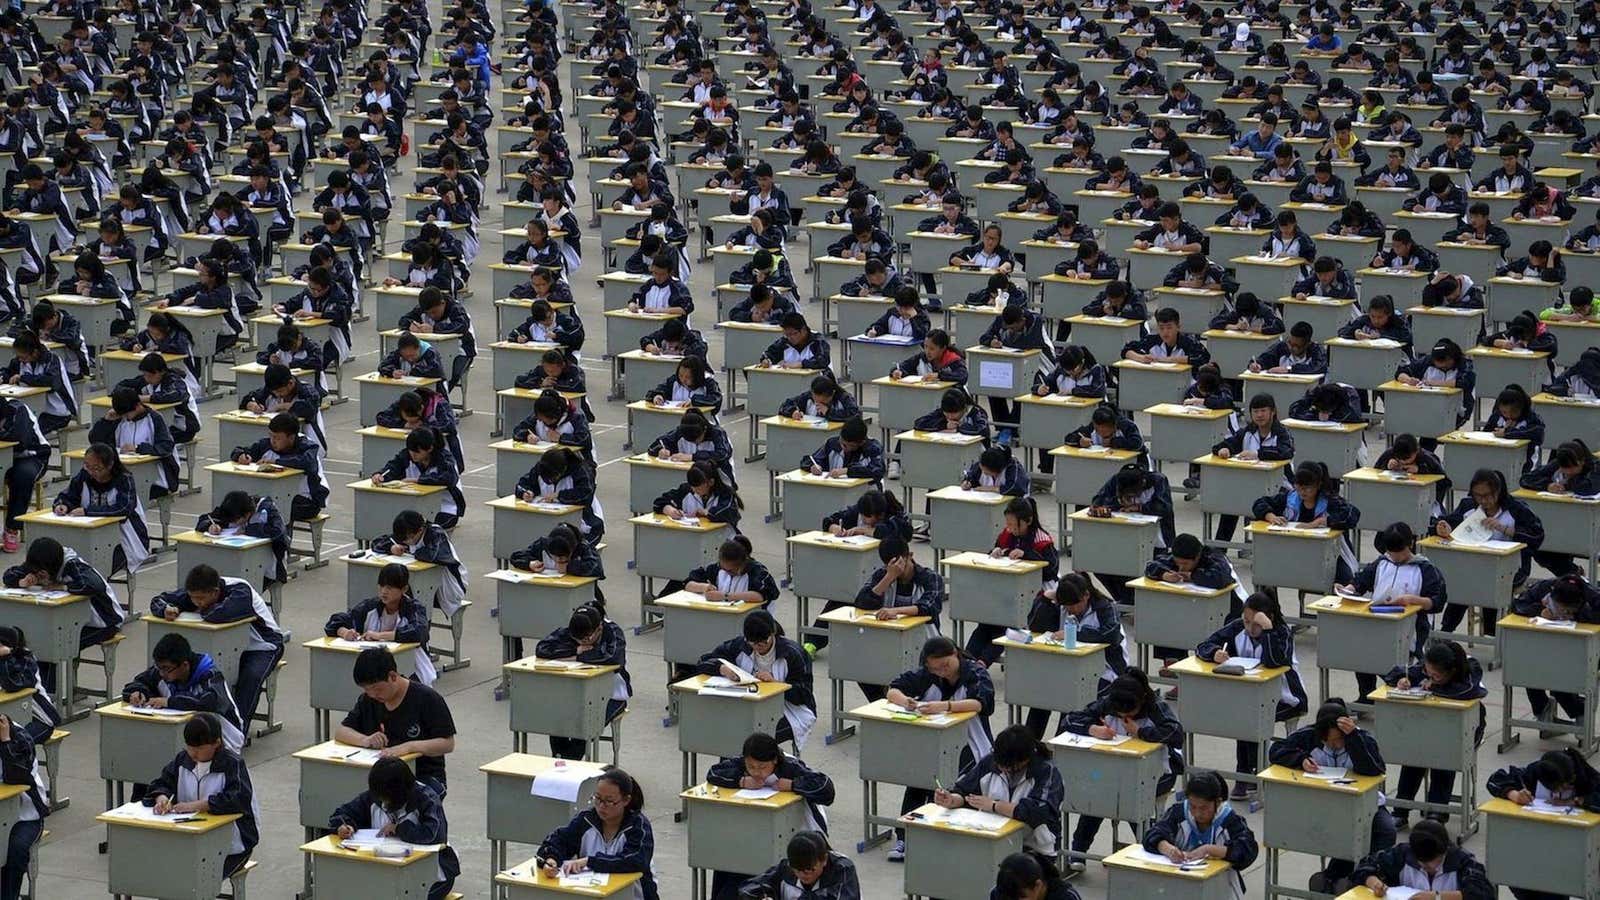 Freshmen university students take an exam in an open-air playground at a high school in Yichuan, Shaanxi province.